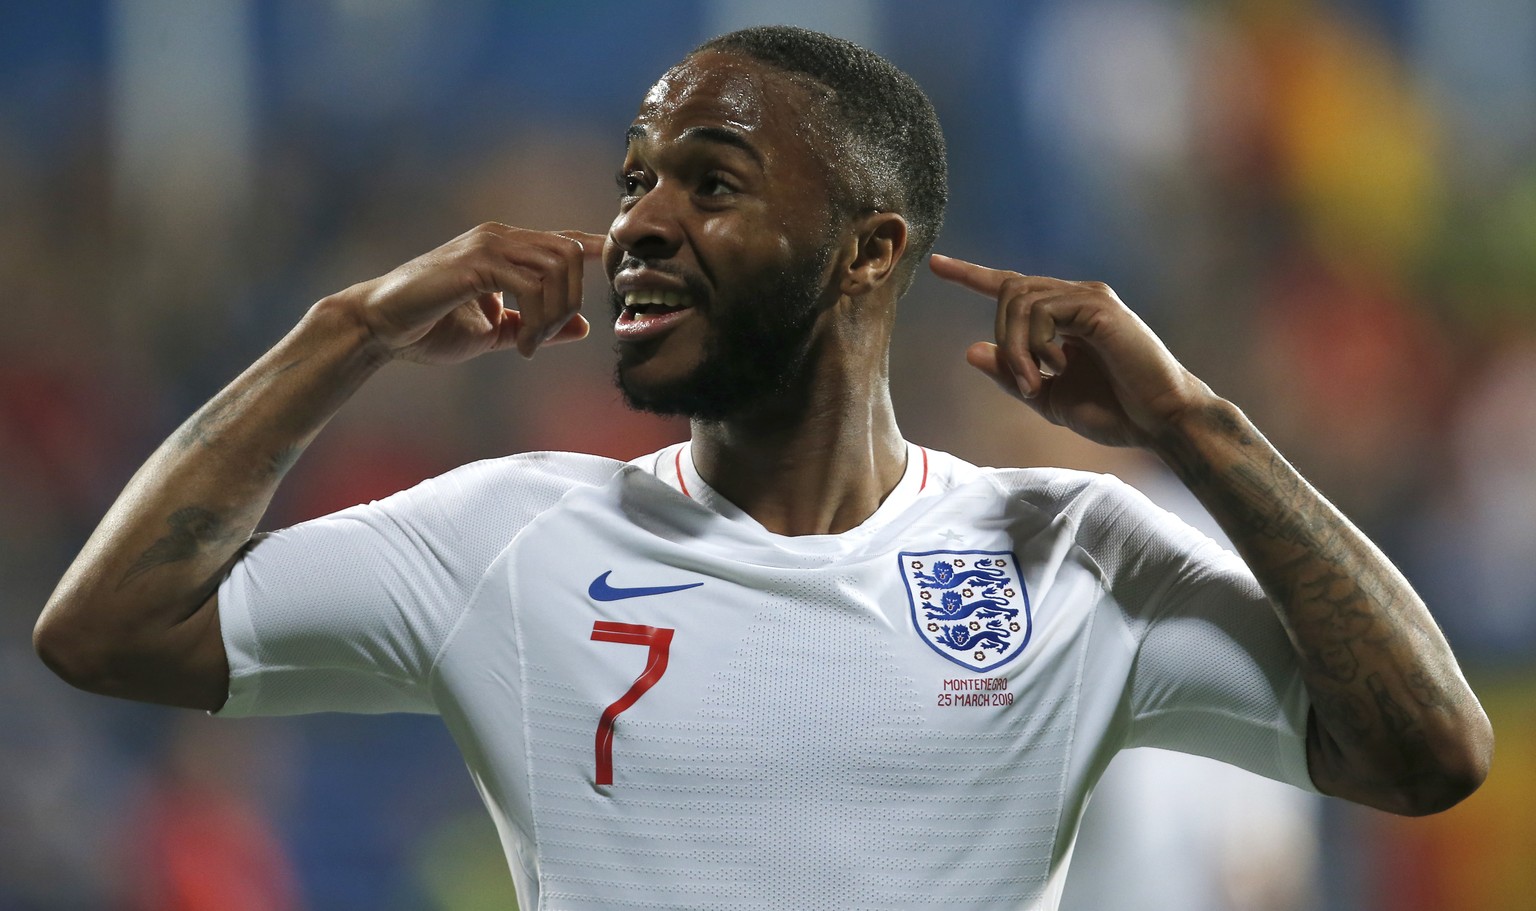 England&#039;s Raheem Sterling celebrates scoring his side&#039;s fifth goal during the Euro 2020 group A qualifying soccer match between Montenegro and England at the City Stadium in Podgorica, Monte ...